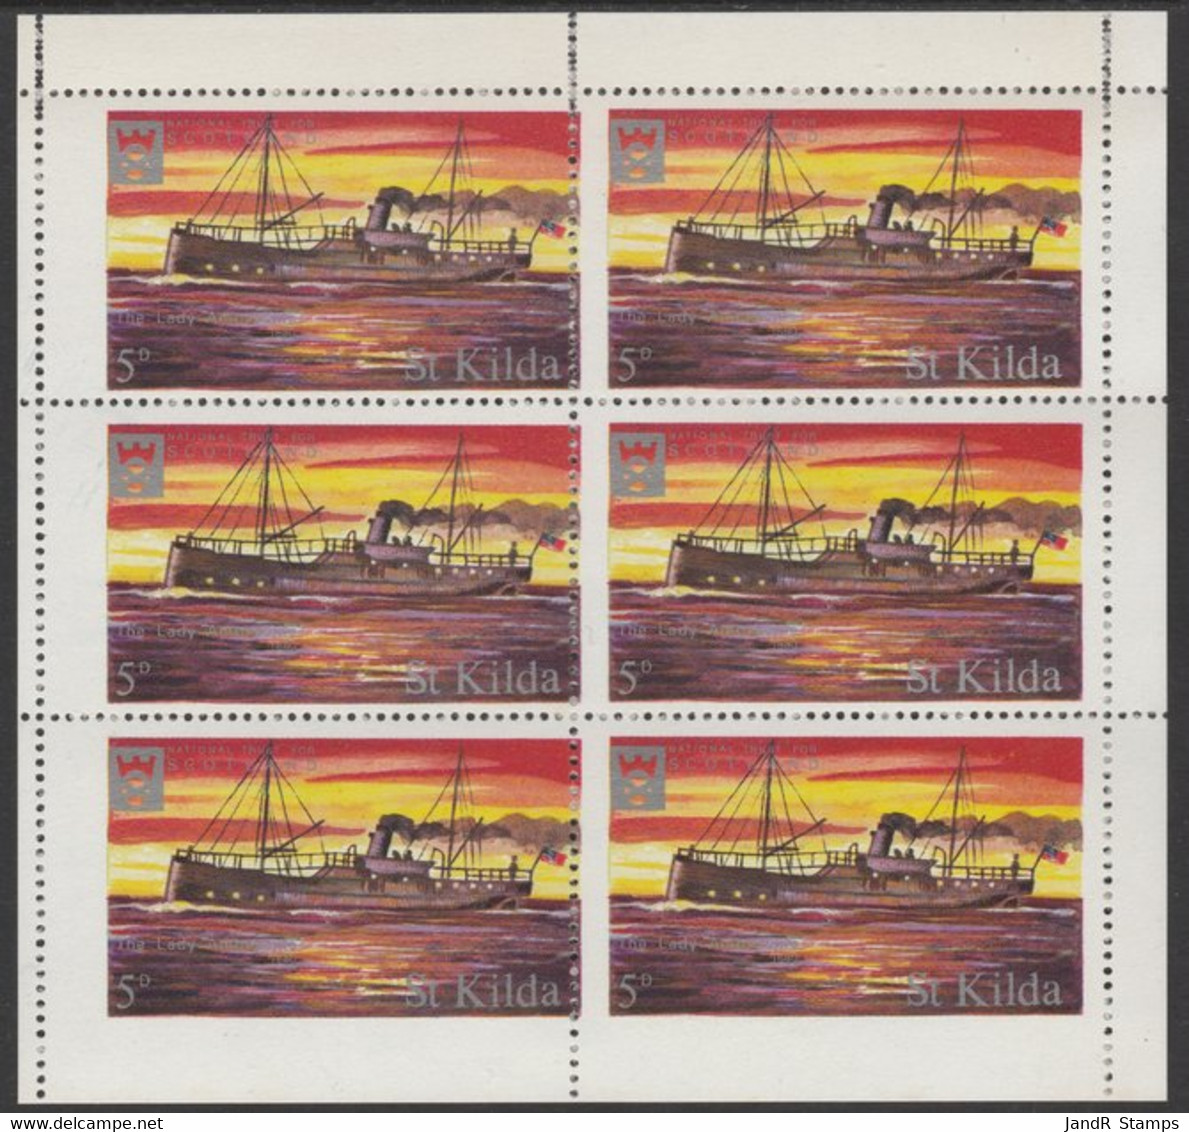 St Kilda 1971 Ships 5d The Lady Ambrodsine Complete Sheetlet Of 6 With Perforating Comb Misplaced (lower Pair Imperf Wit - Local Issues